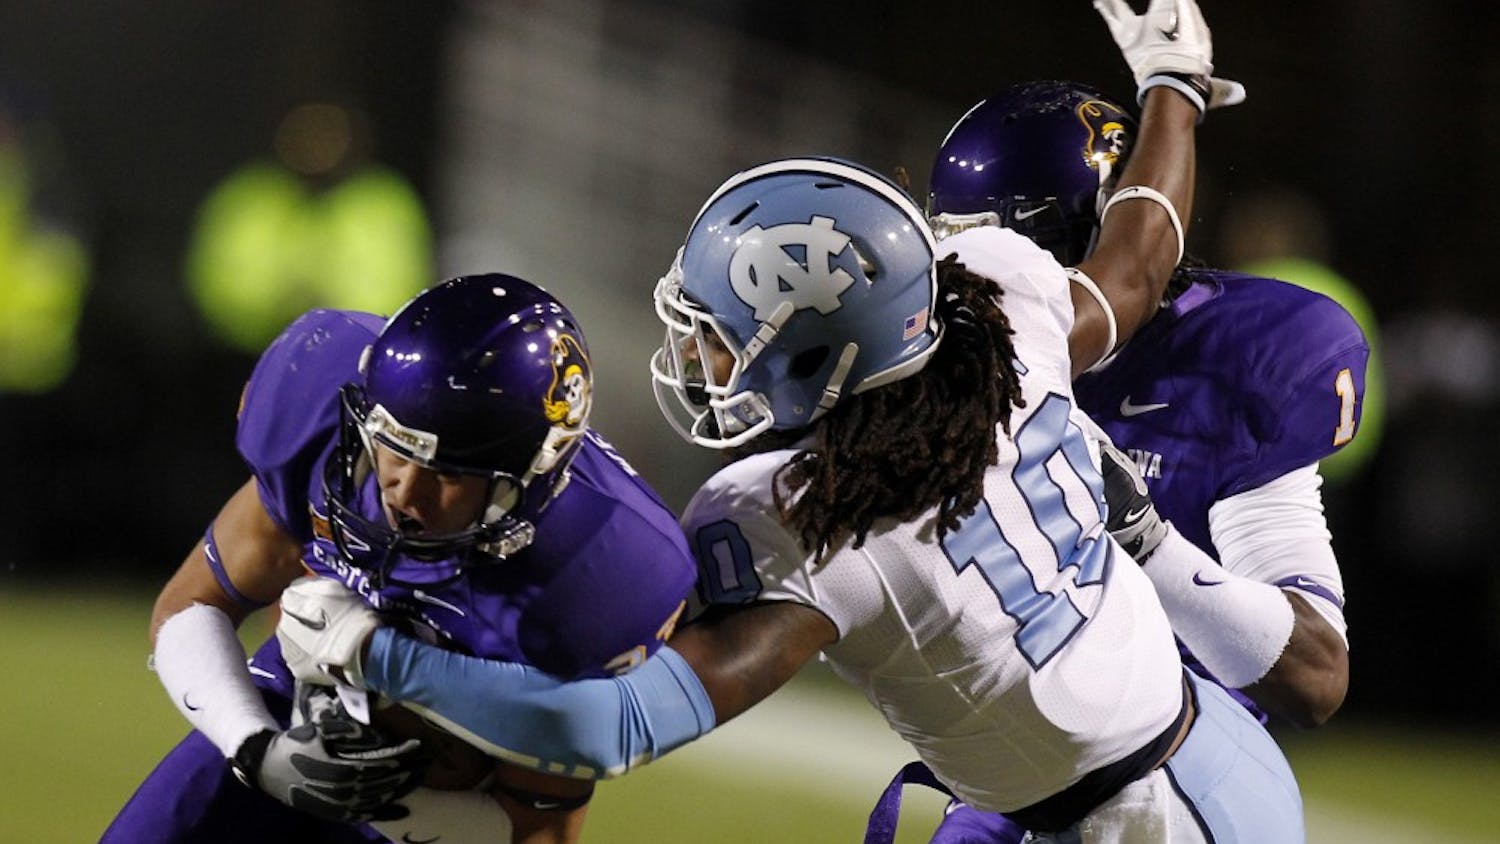 North Carolina safety Tre Boston (10) strips the ball from East Carolina wide receiver Danny Webster (33) in the first quarter on Saturday, October 31, 2011 at Dowdy-Ficklen Stadium in Greenville, North Carolina. (Chuck Liddy/Raleigh News &amp; Observer/MCT)